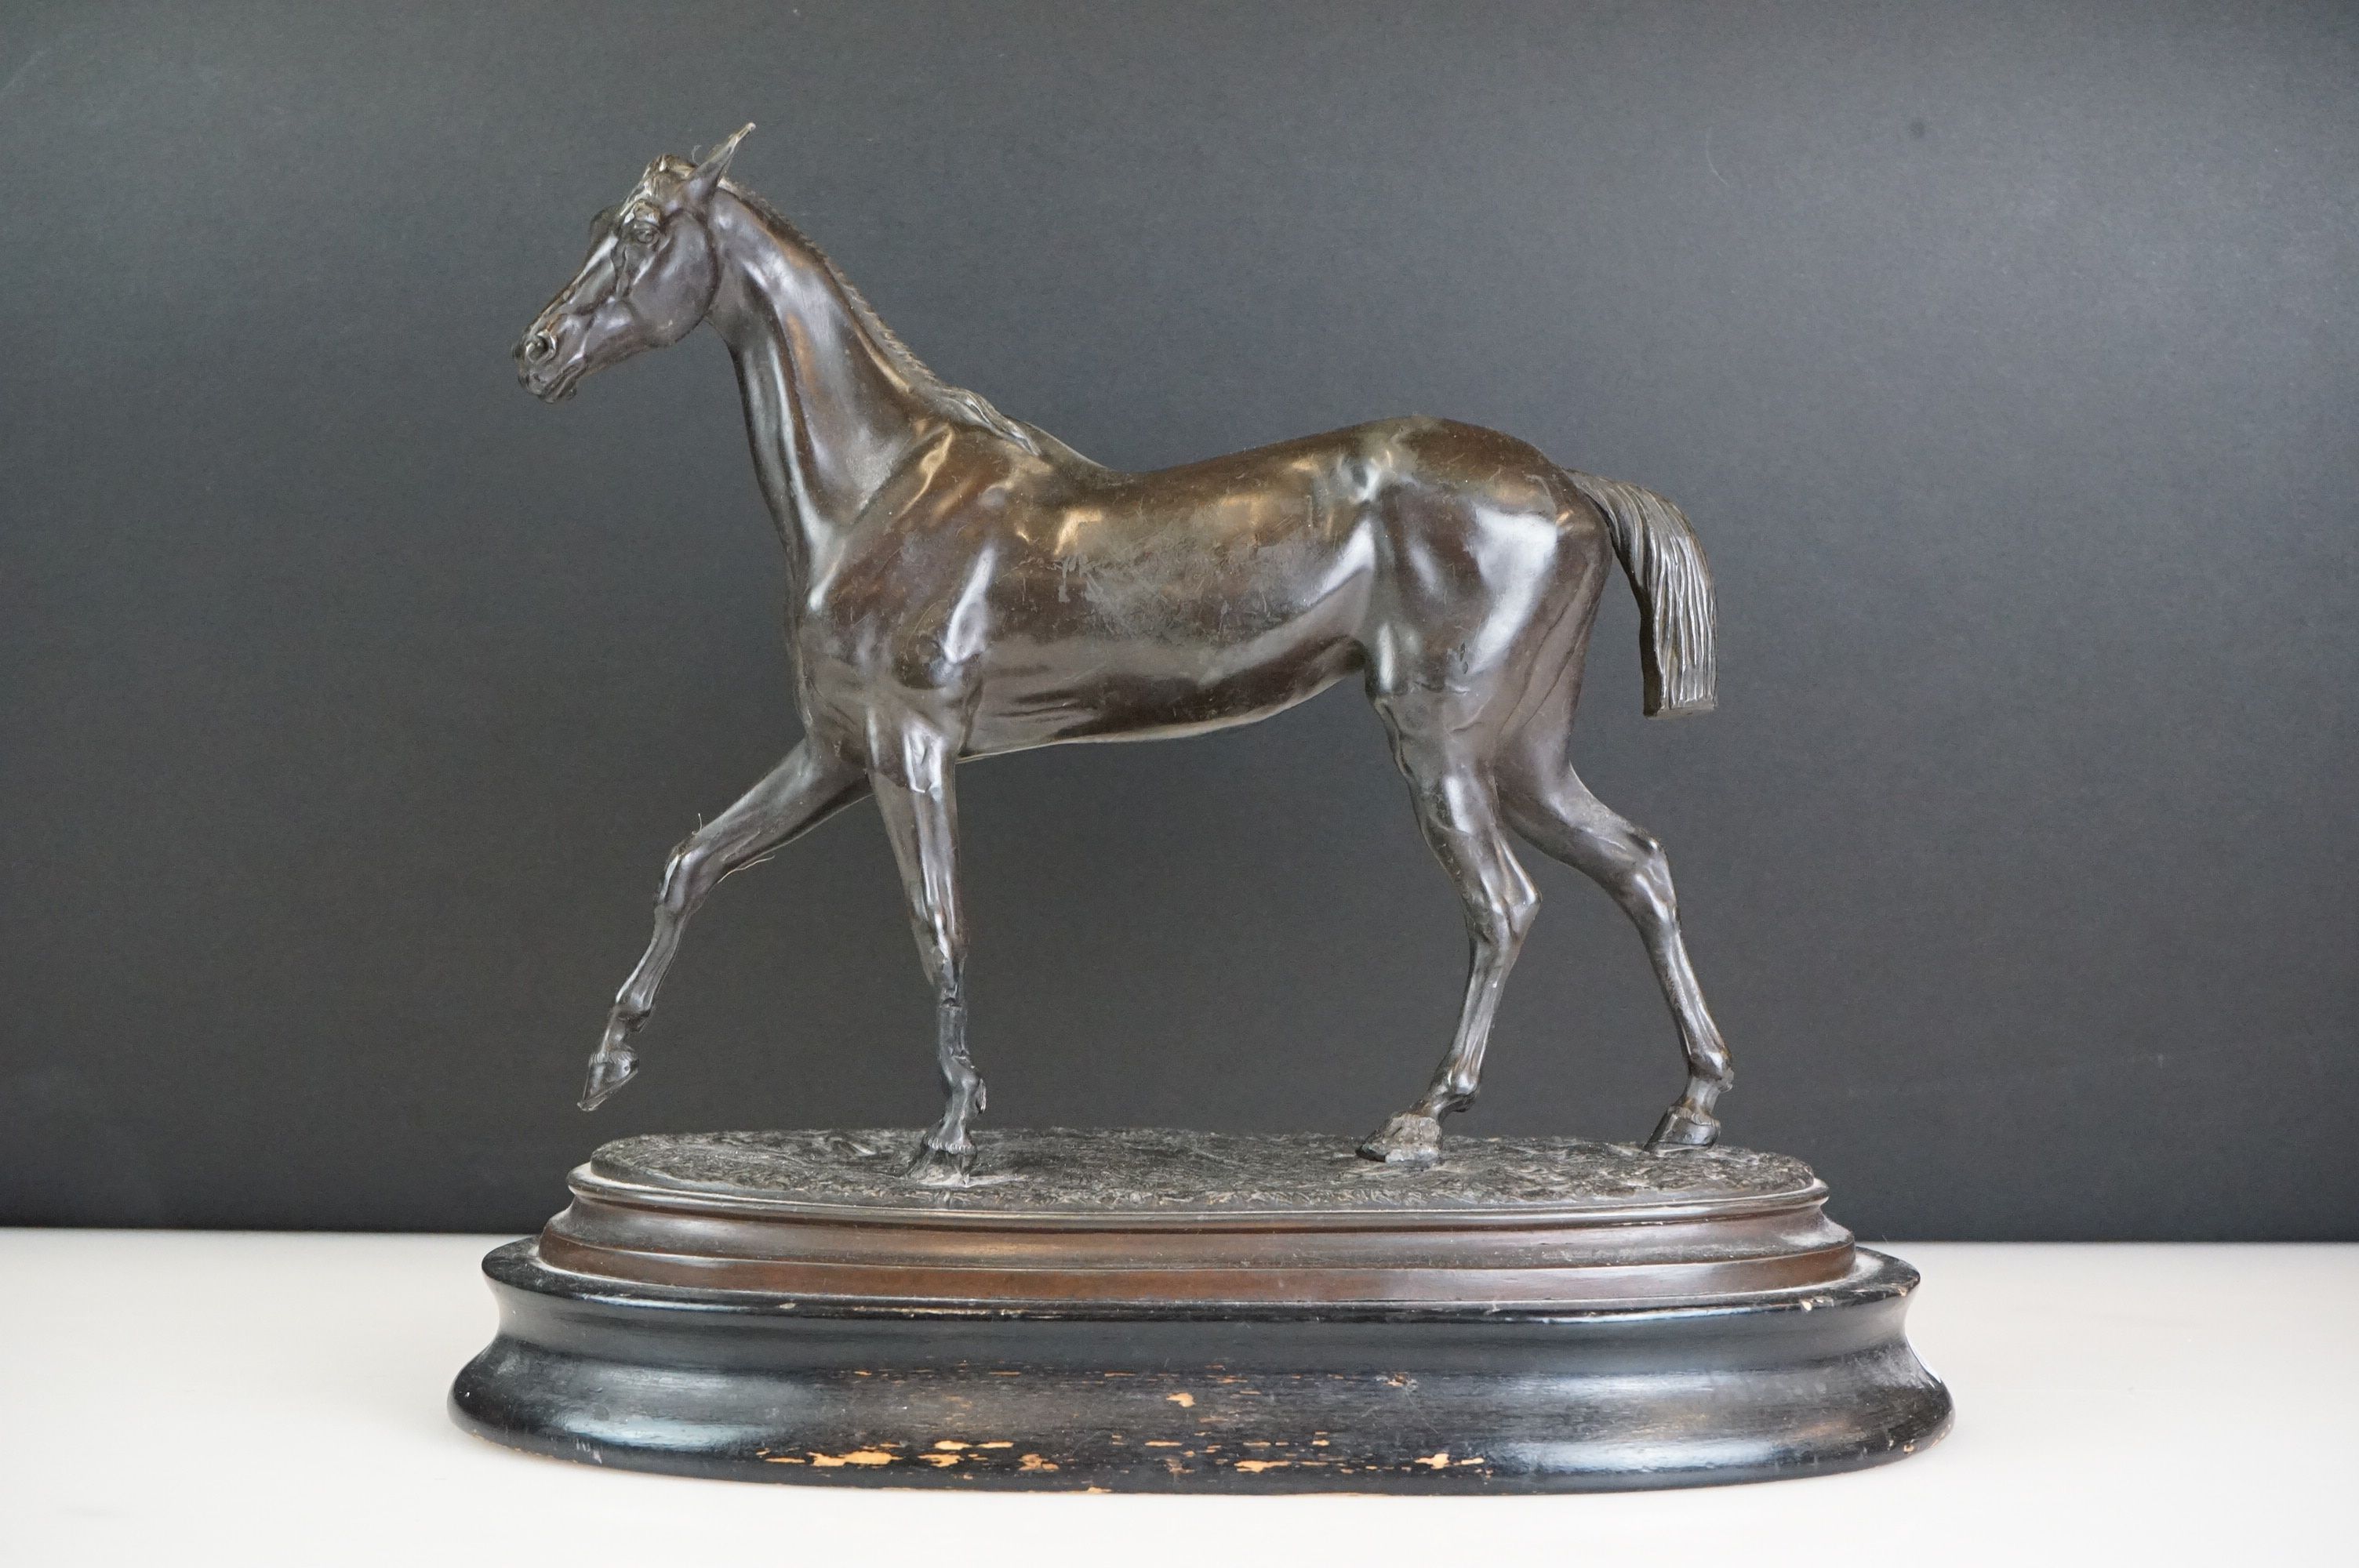 Spelter figure of a horse mid-stride, mounted on a wooden base, approx 27cm high